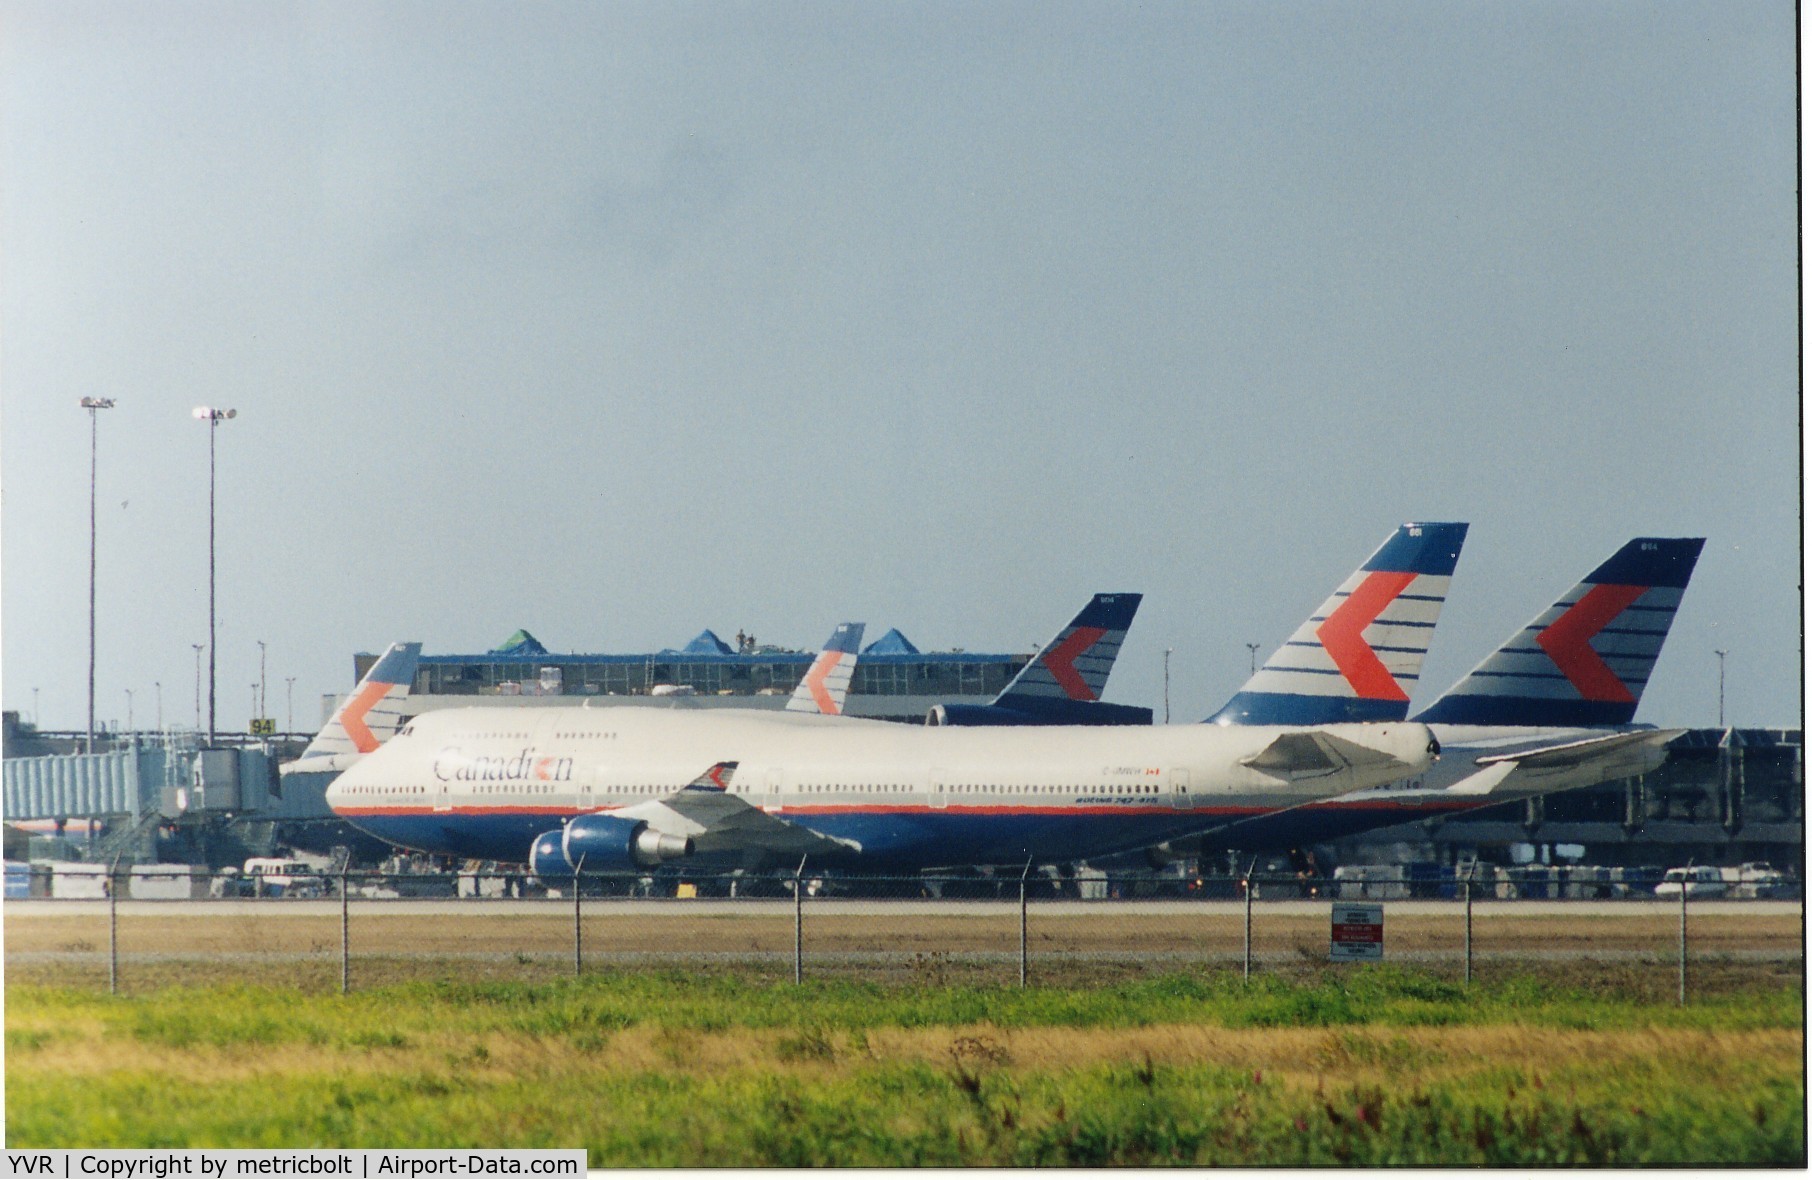 Vancouver International Airport, Vancouver, British Columbia Canada (YVR) - Sep.1998. Canadian Airlines were the dominant carrier at YVR in the 90s.